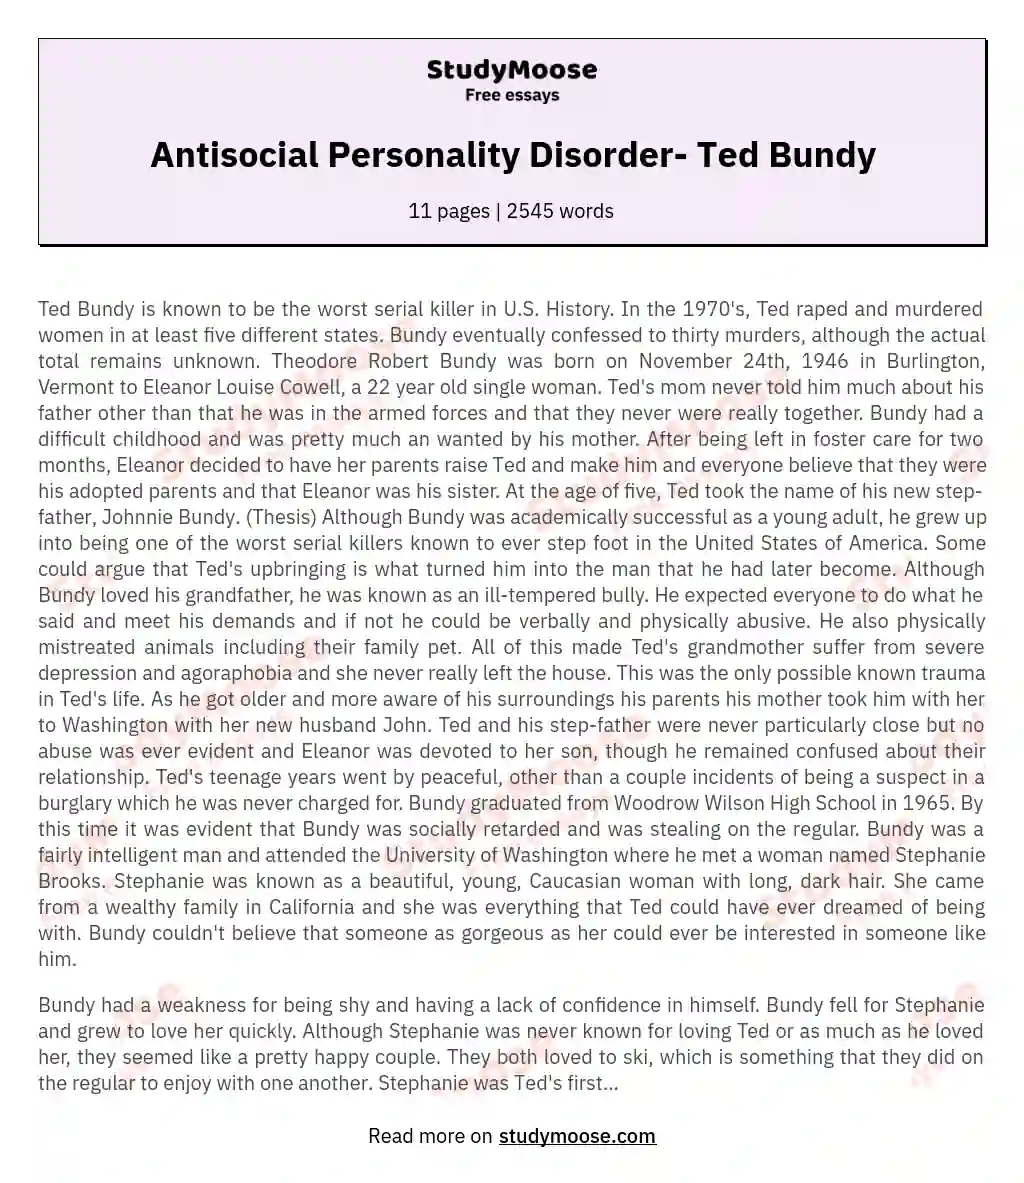 Antisocial Personality Disorder- Ted Bundy essay